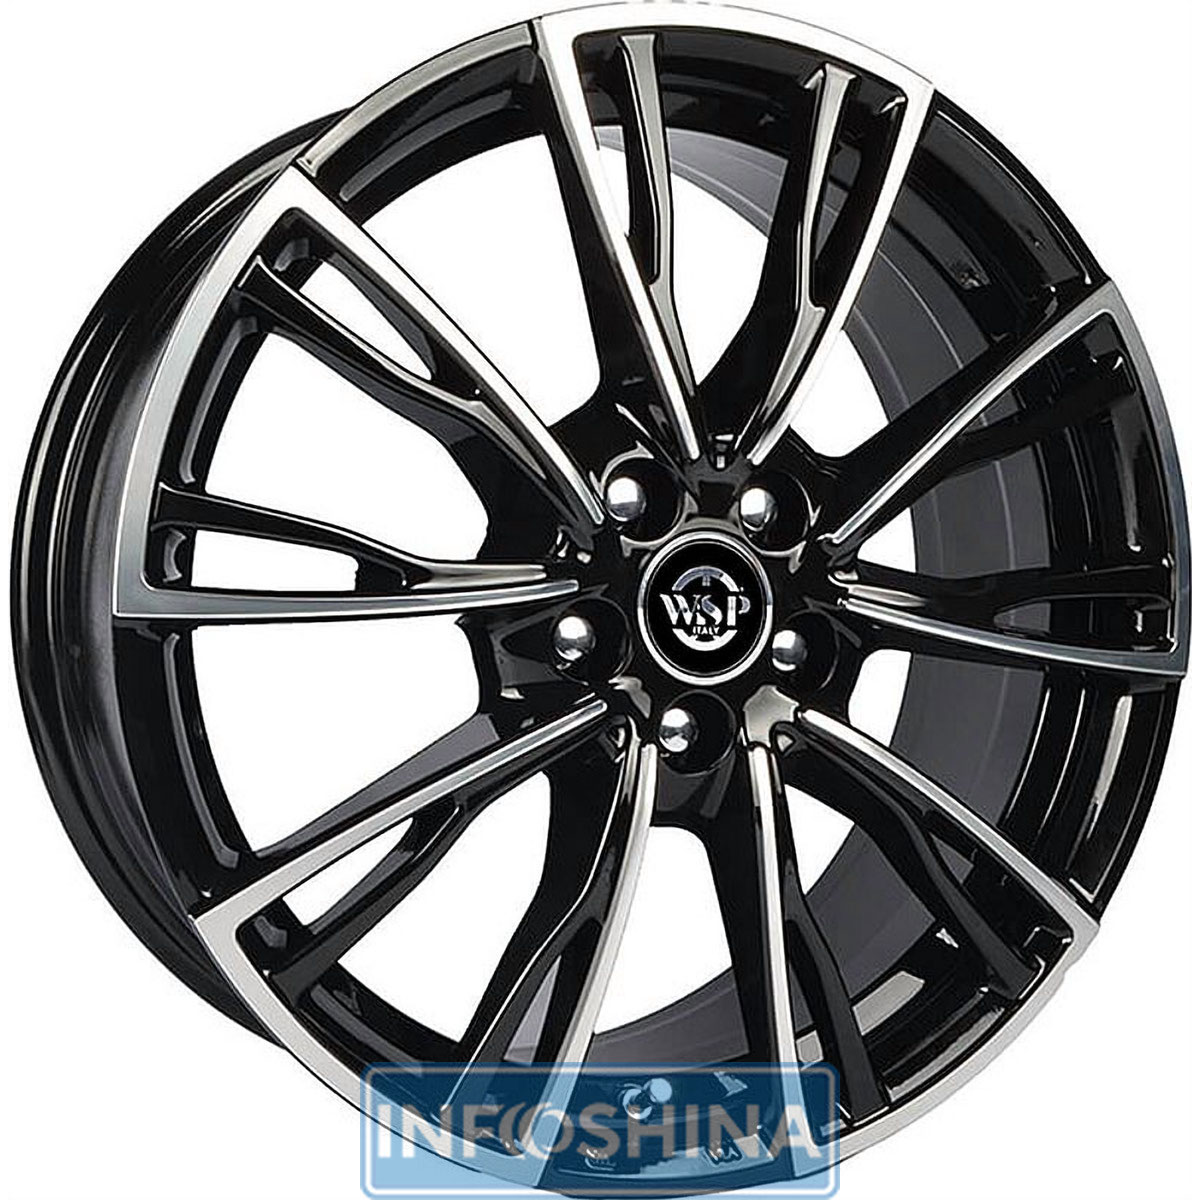 WSP Italy Volkswagen WD006 Lugano Glossy Black Polished